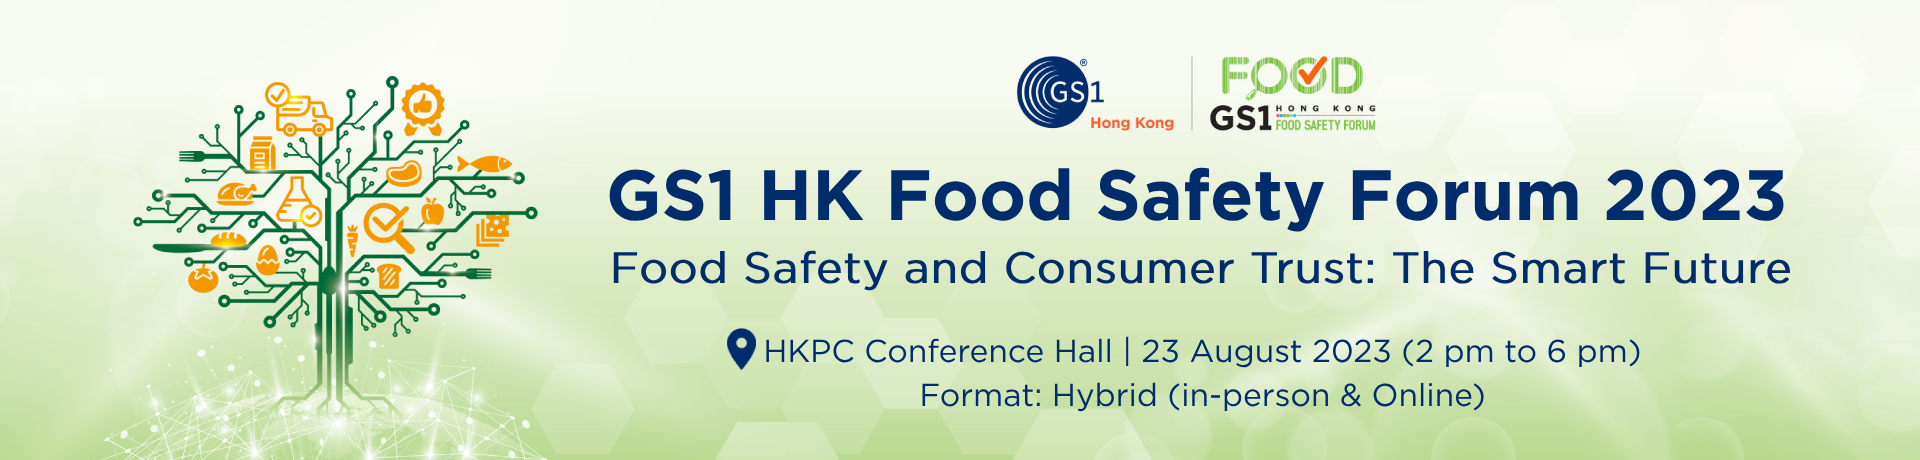 GS1 HK Food Safety Forum 2023